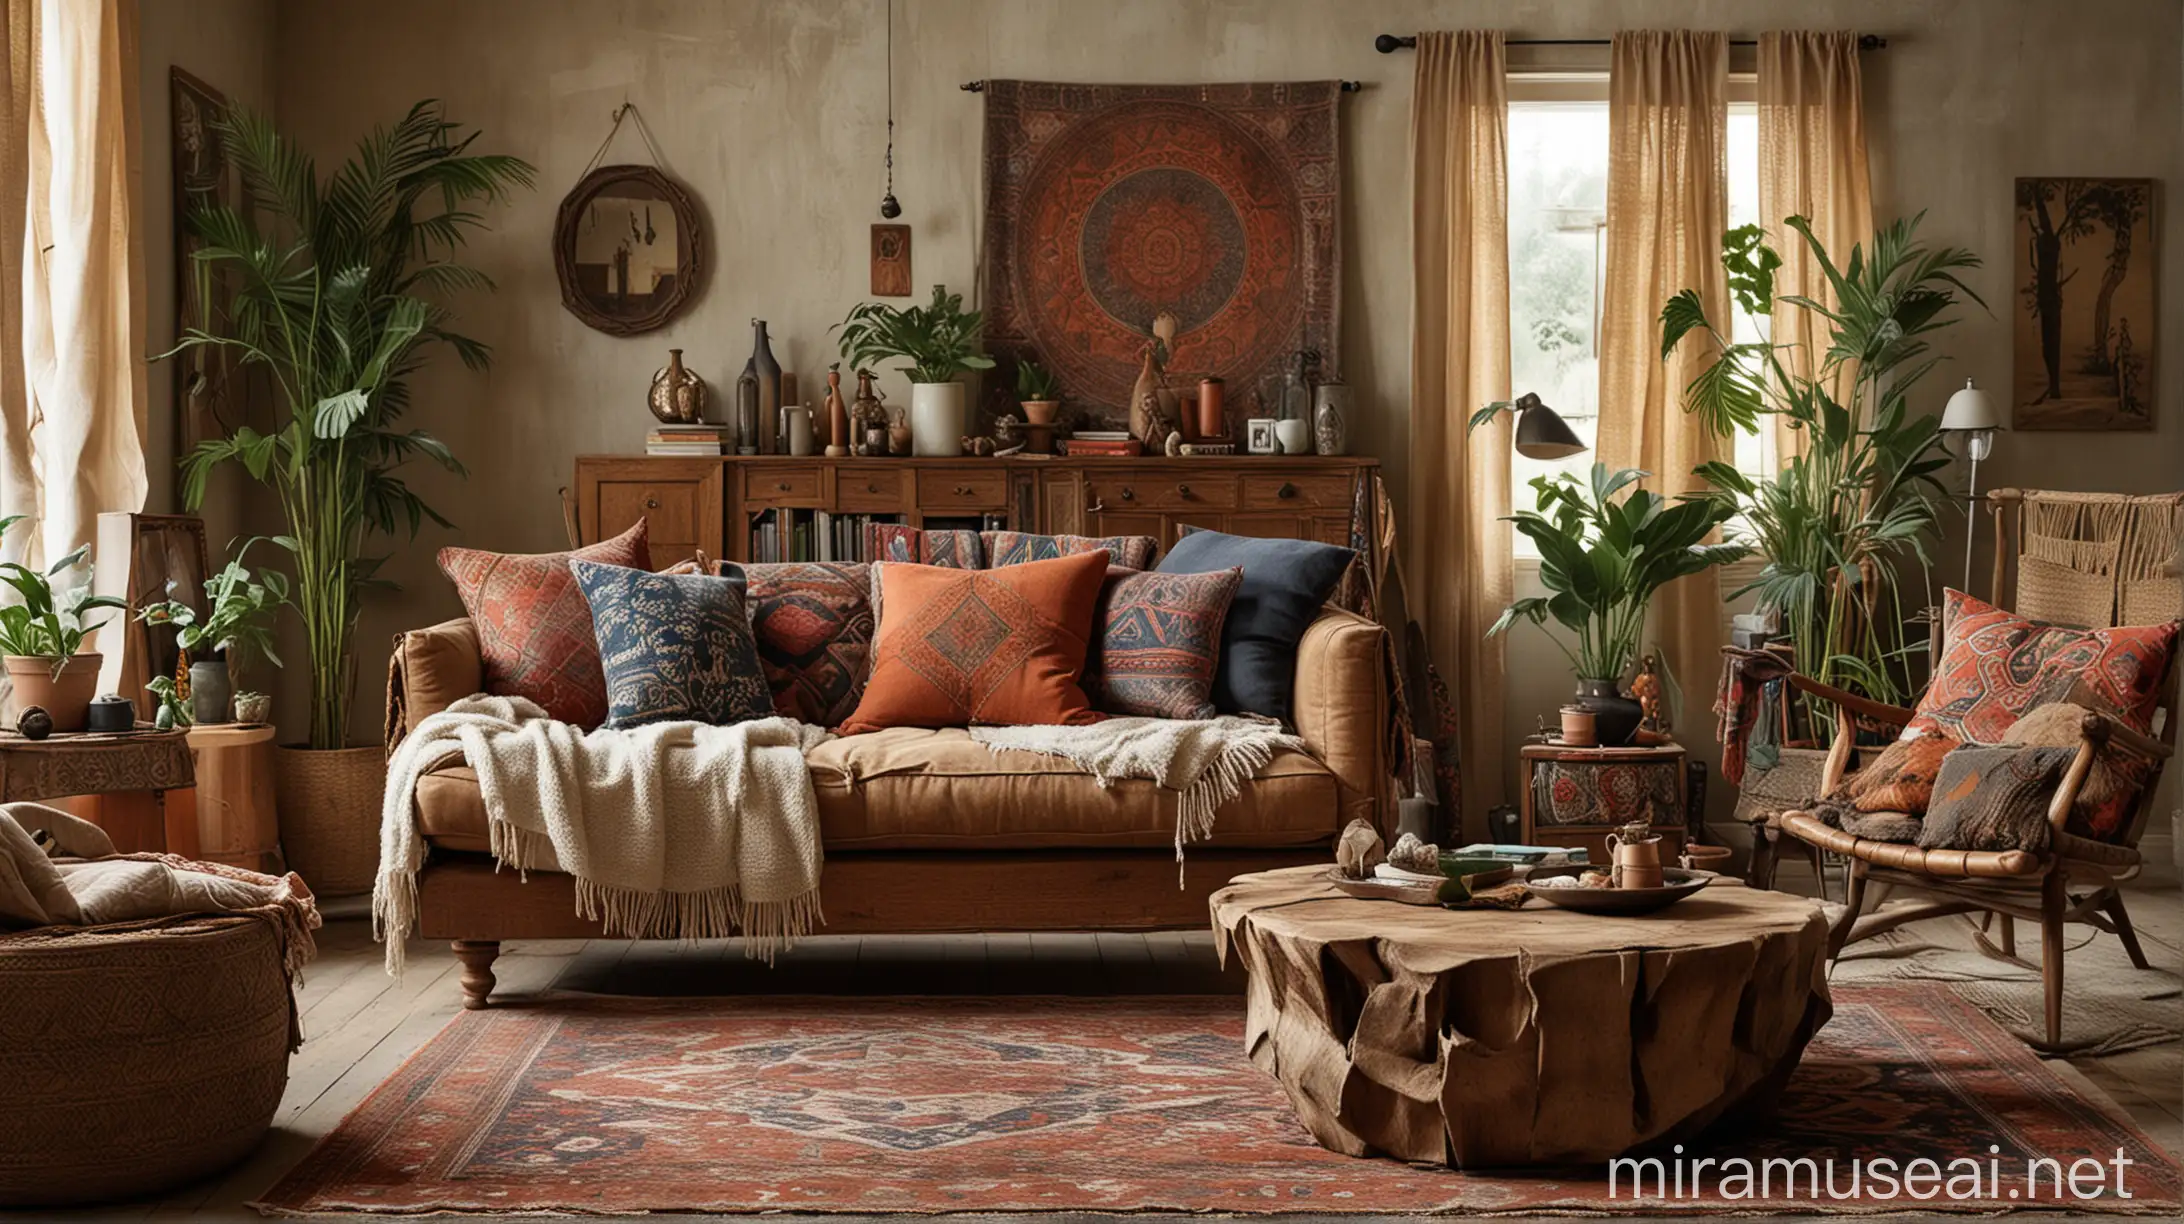 A photo capturing the bohemian and nomadic feel of the living room, emphasizing the use of natural materials and the eclectic mix of textures and patterns.